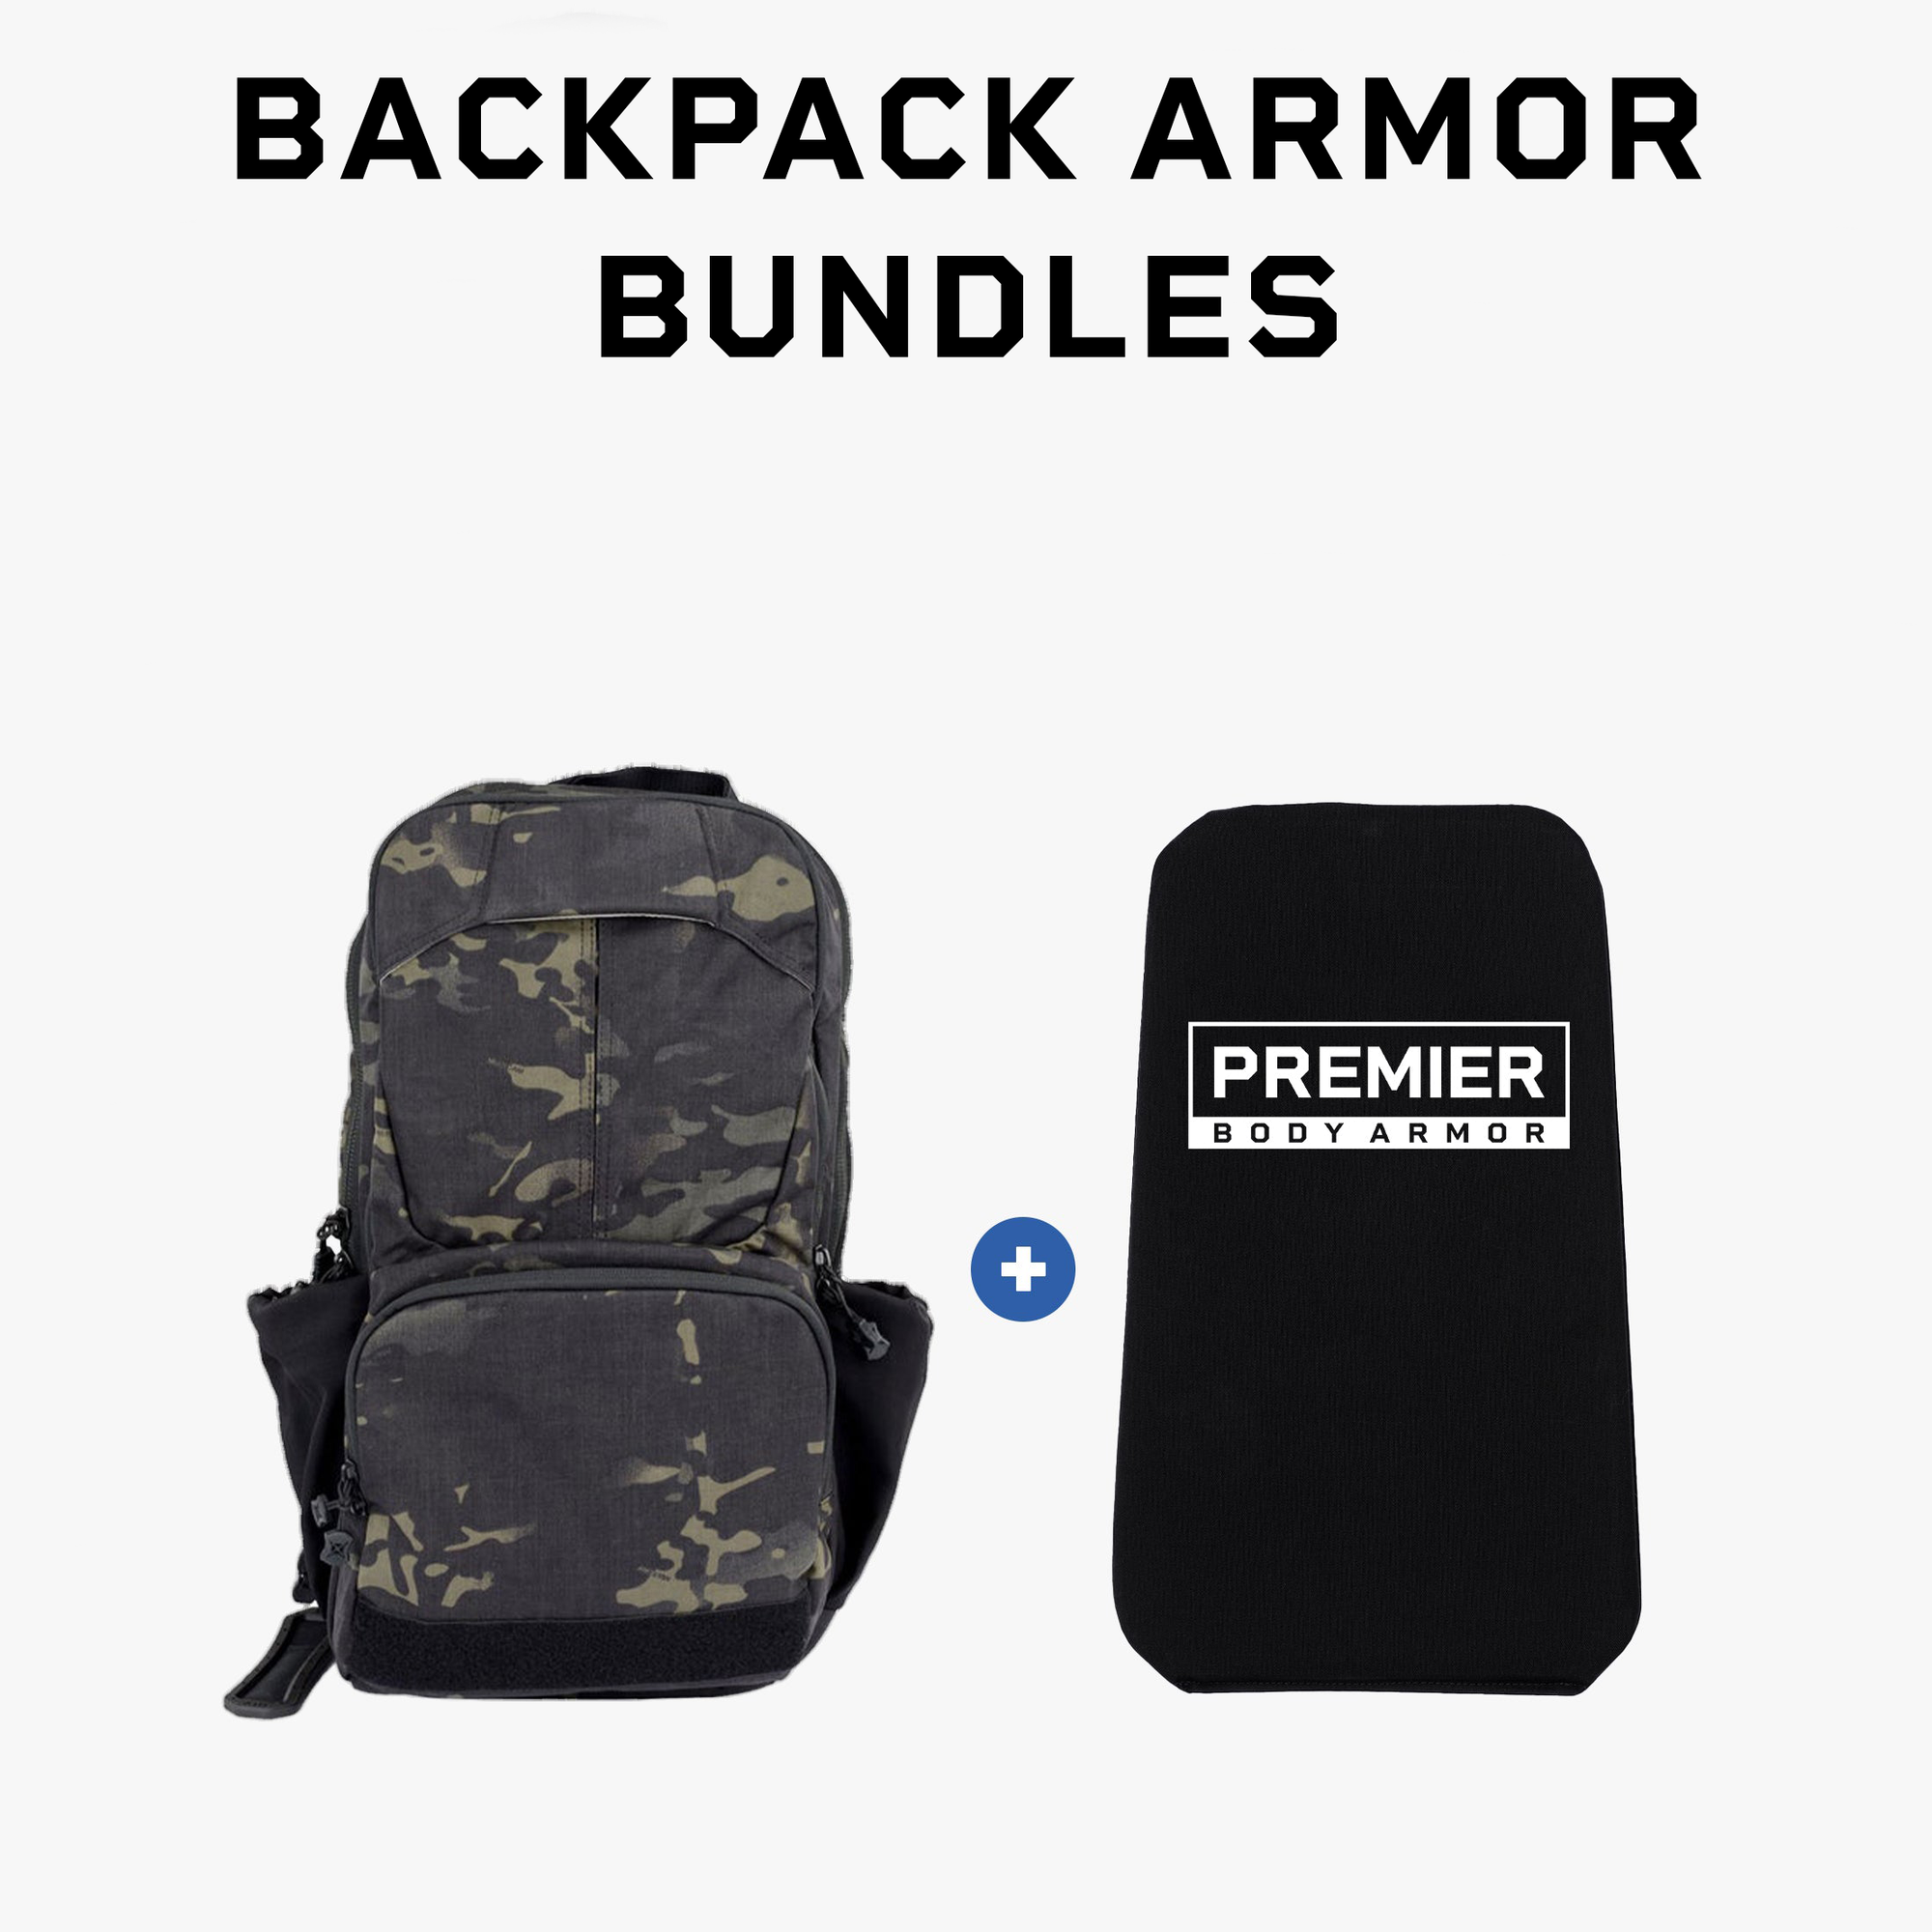 Premier Body Armor has collaborated with popular bags in the industry to produce custom fit backpack armor inserts. Custom level IIIA ballistic protection to fit in hidden armor pockets are the best solution for concealable body armor.